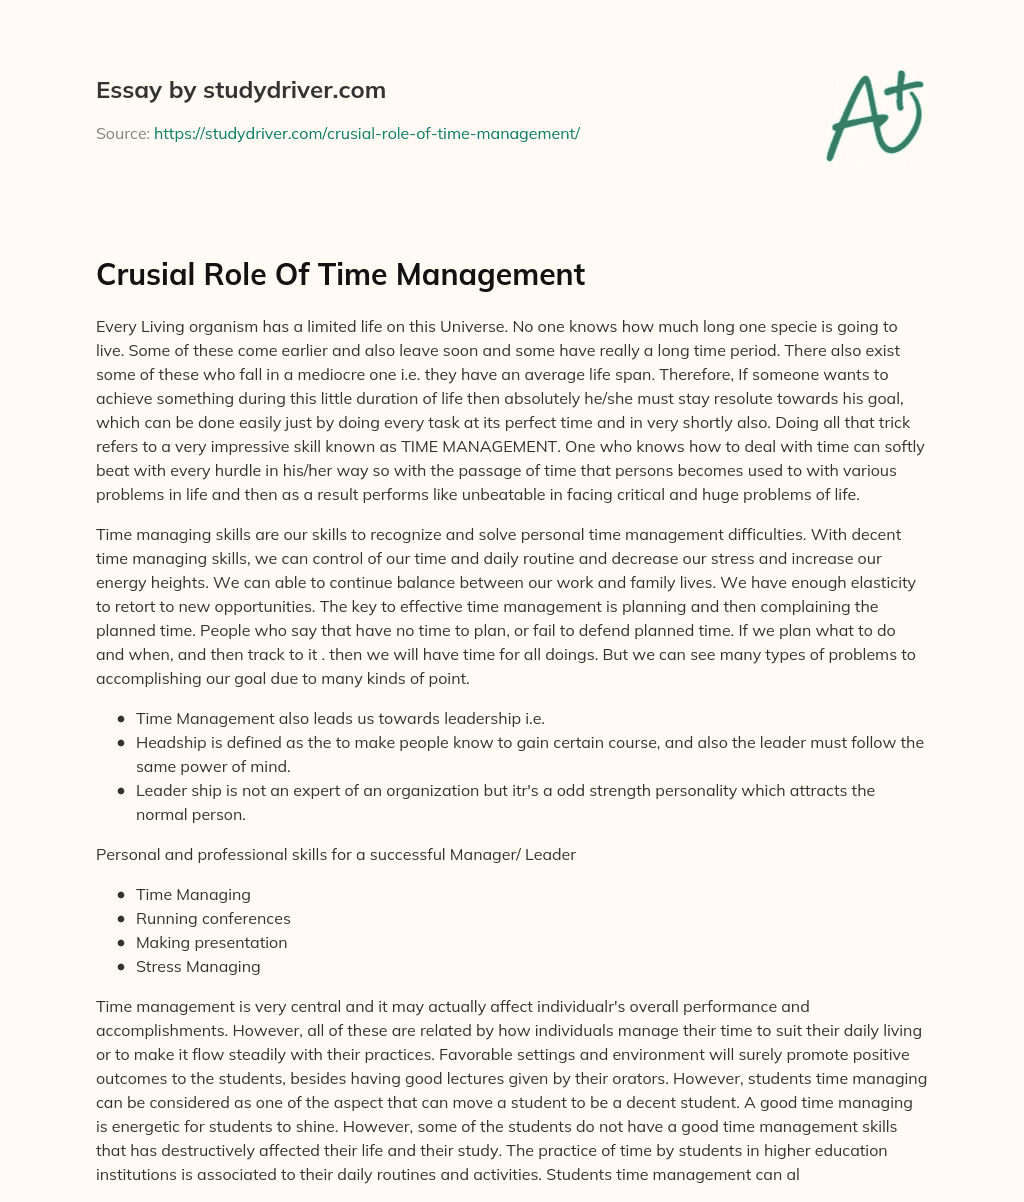 Crusial Role of Time Management essay